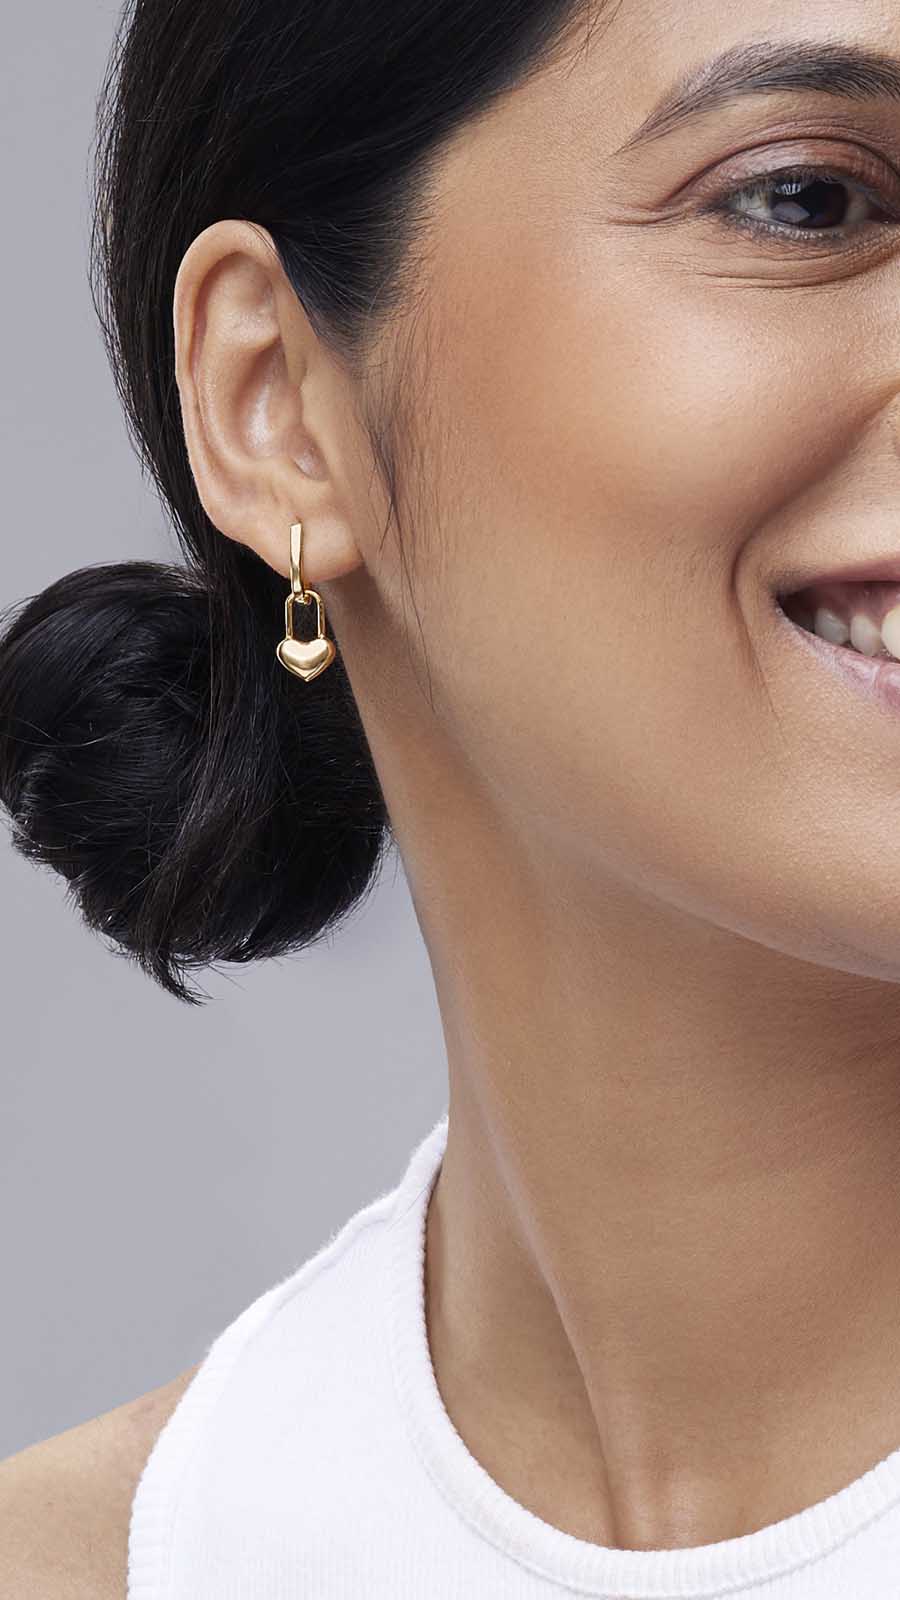 Zoomed picture of an Indian working woman wearing self love earrings